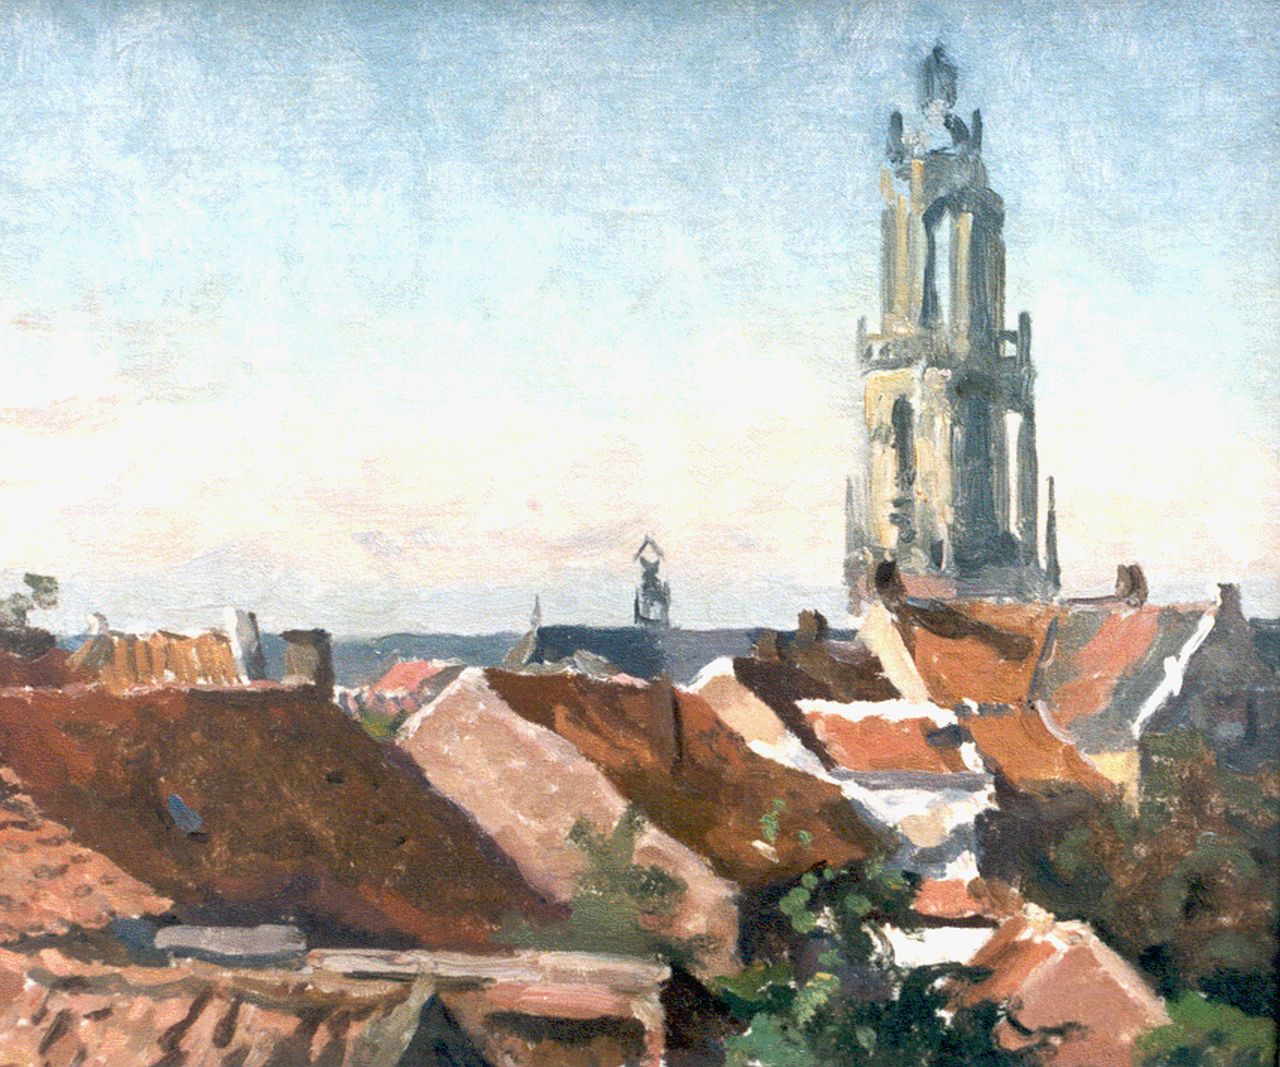 Tholen W.B.  | Willem Bastiaan Tholen, A view of the Cuneratoren, Rhenen, oil on canvas laid down on panel 26.2 x 30.7 cm, signed l.l.